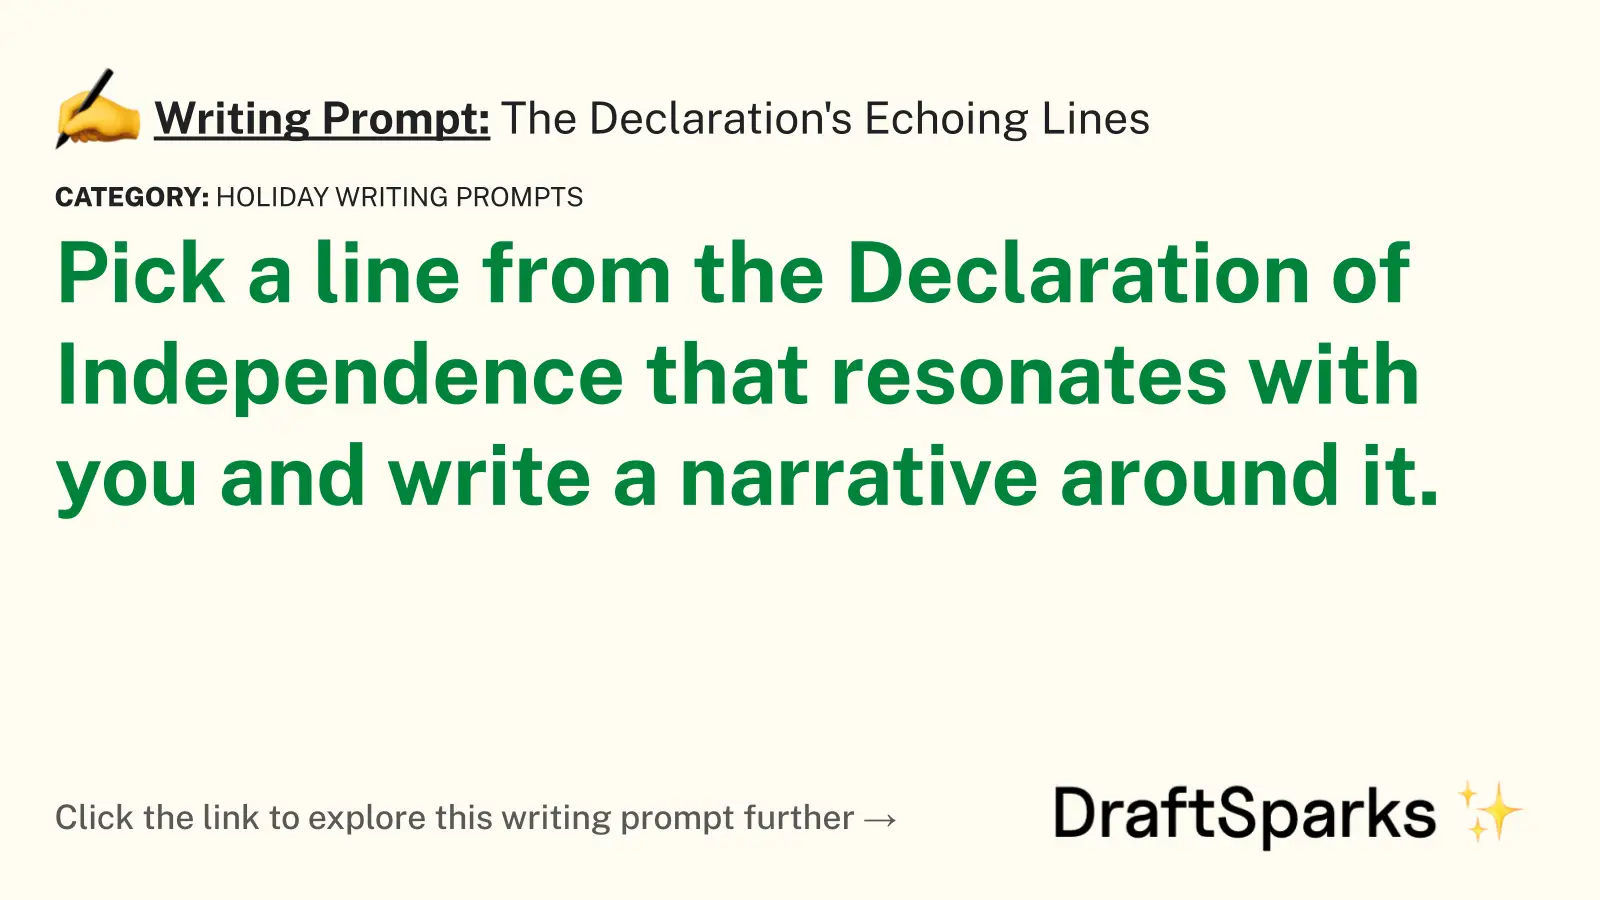 The Declaration’s Echoing Lines